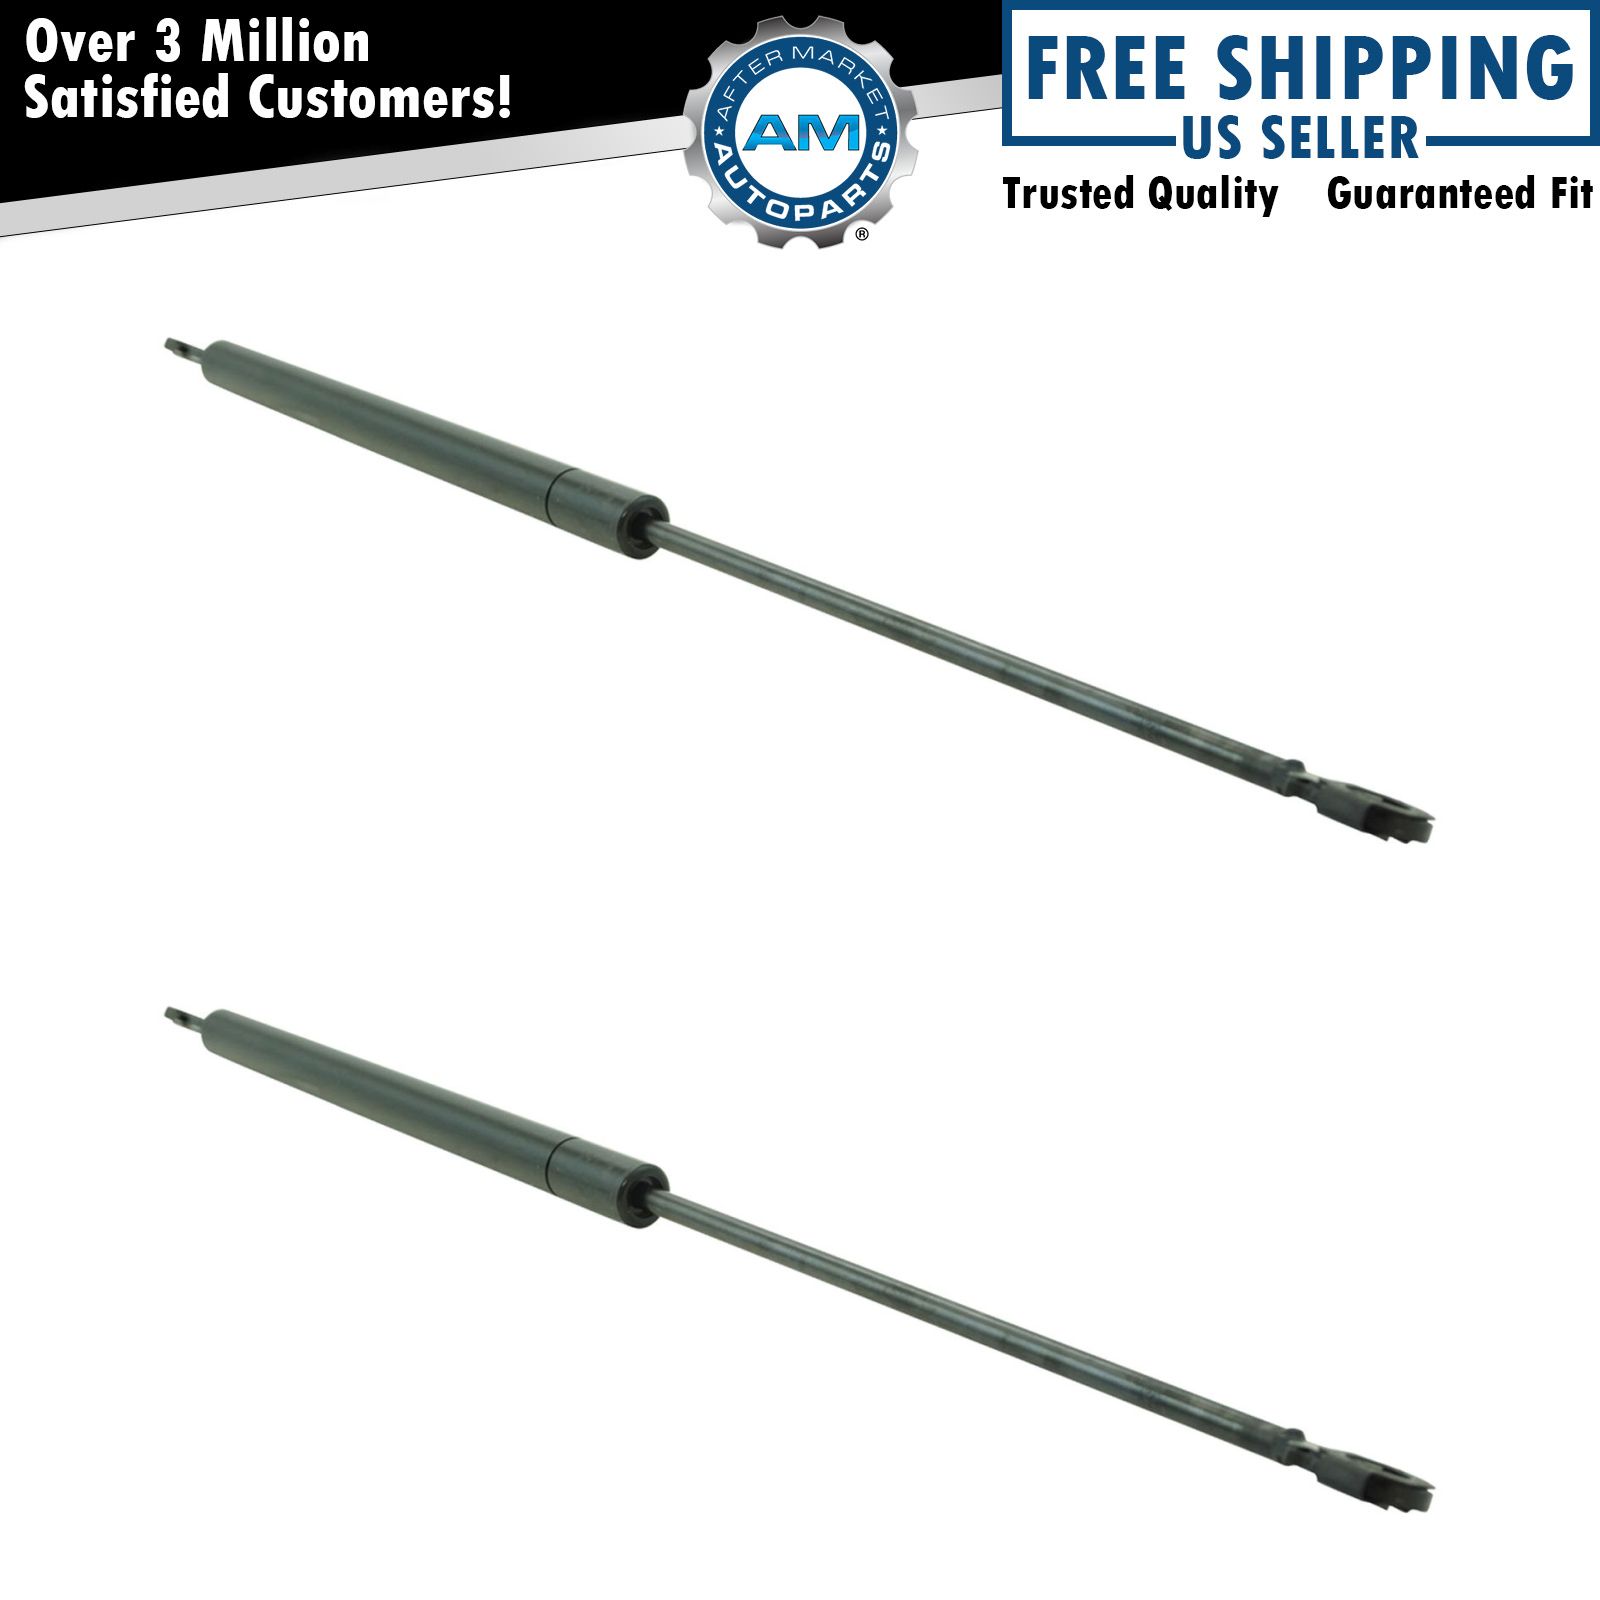 Hood Lift Support Struts Pair Set of 2 for Pontiac Buick Cadillac Olds